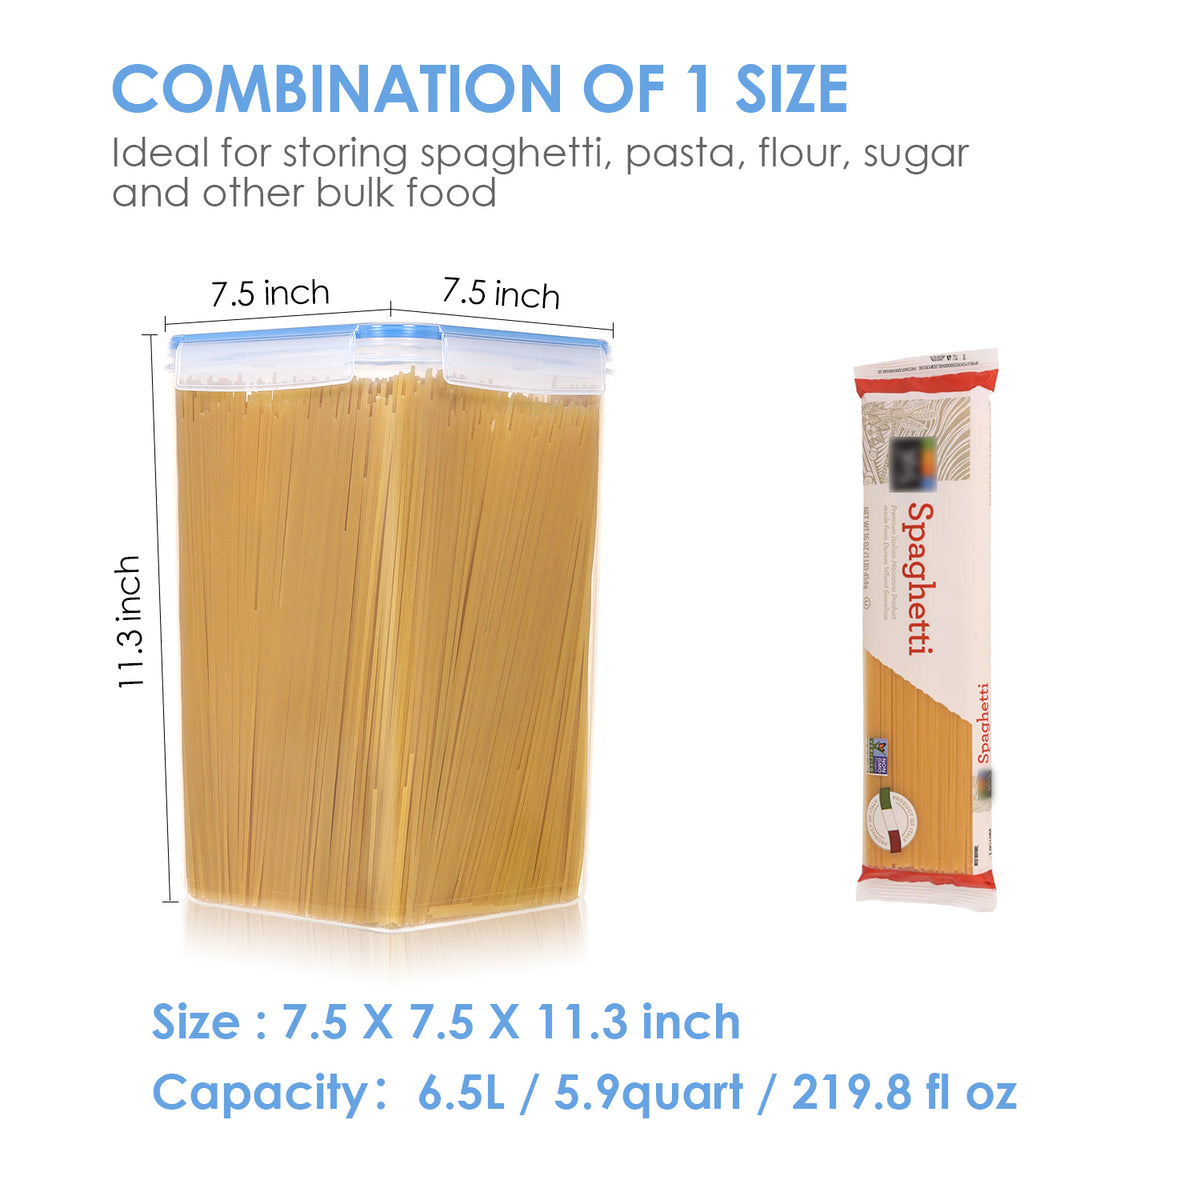 Extra Large Tall Food Storage Containers (6.5L|220oz|Set of 4) For Flour,  Sugar, Rice - Airtight Kitchen & Pantry Bulk Food Storage - 4 PC Set 